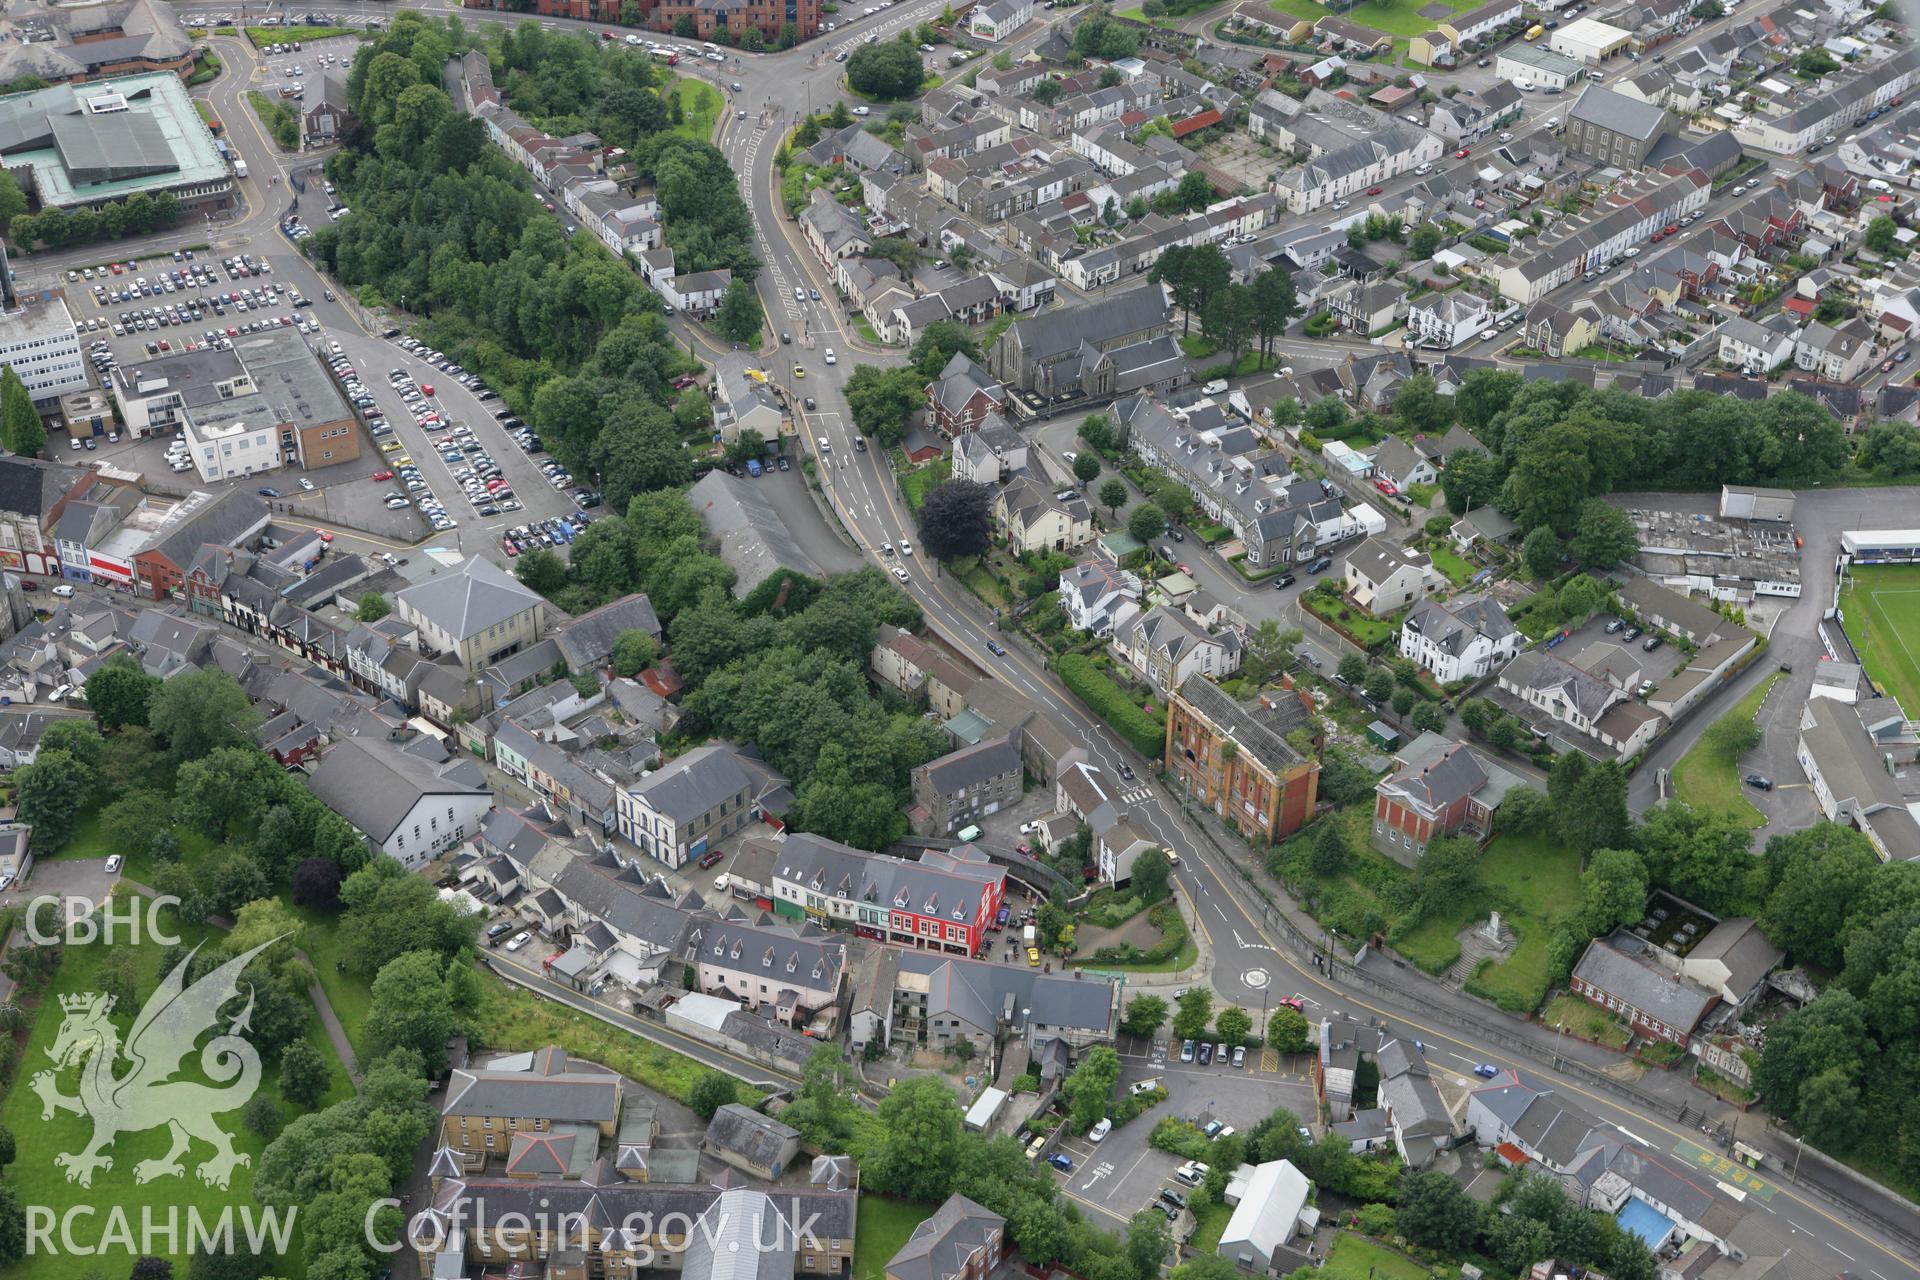 RCAHMW colour oblique aerial photograph of Merthyr Tydfil, town centre. Taken on 30 July 2007 by Toby Driver